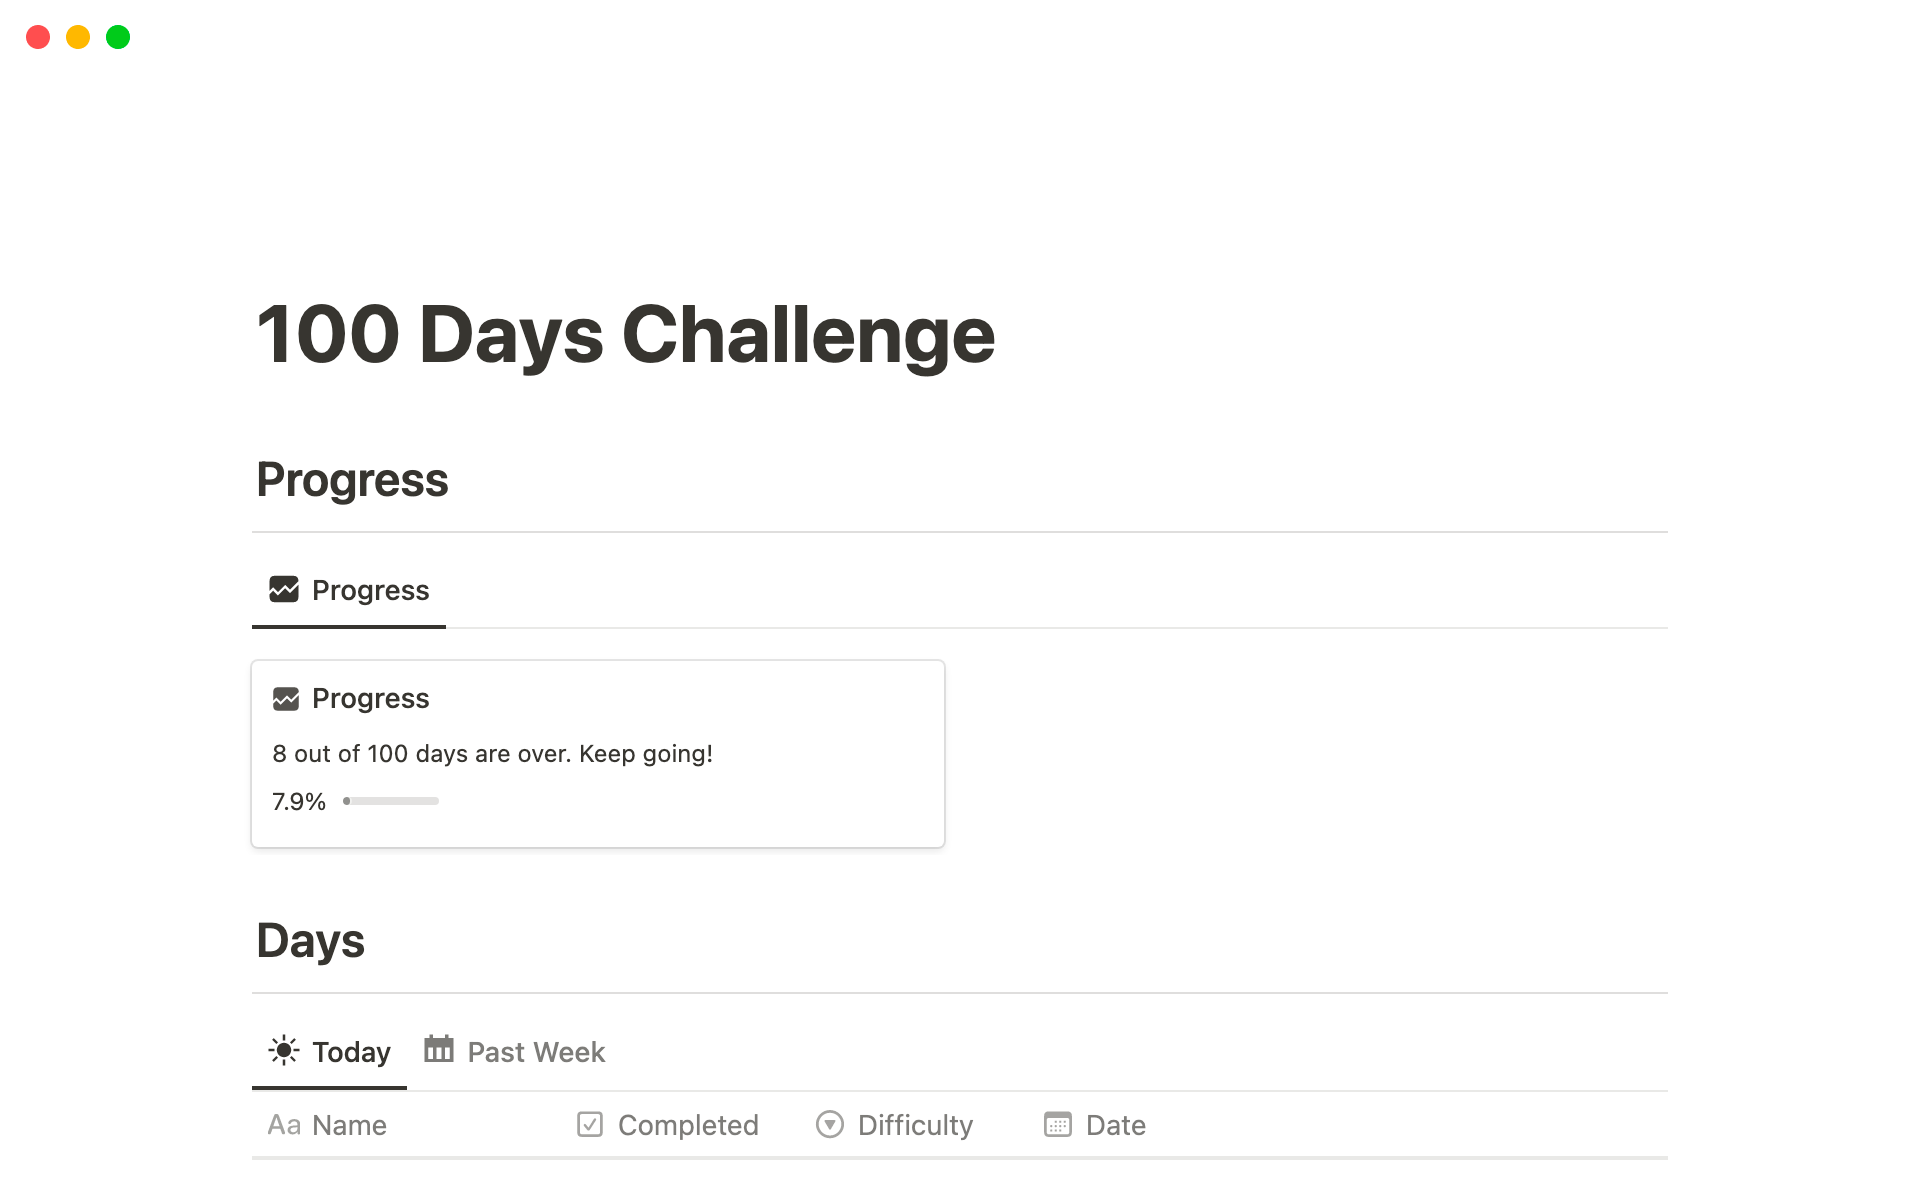 The 100 Days Challenge helps users set and achieve goals within a 100-day timeframe, promoting discipline and accountability for personal growth.